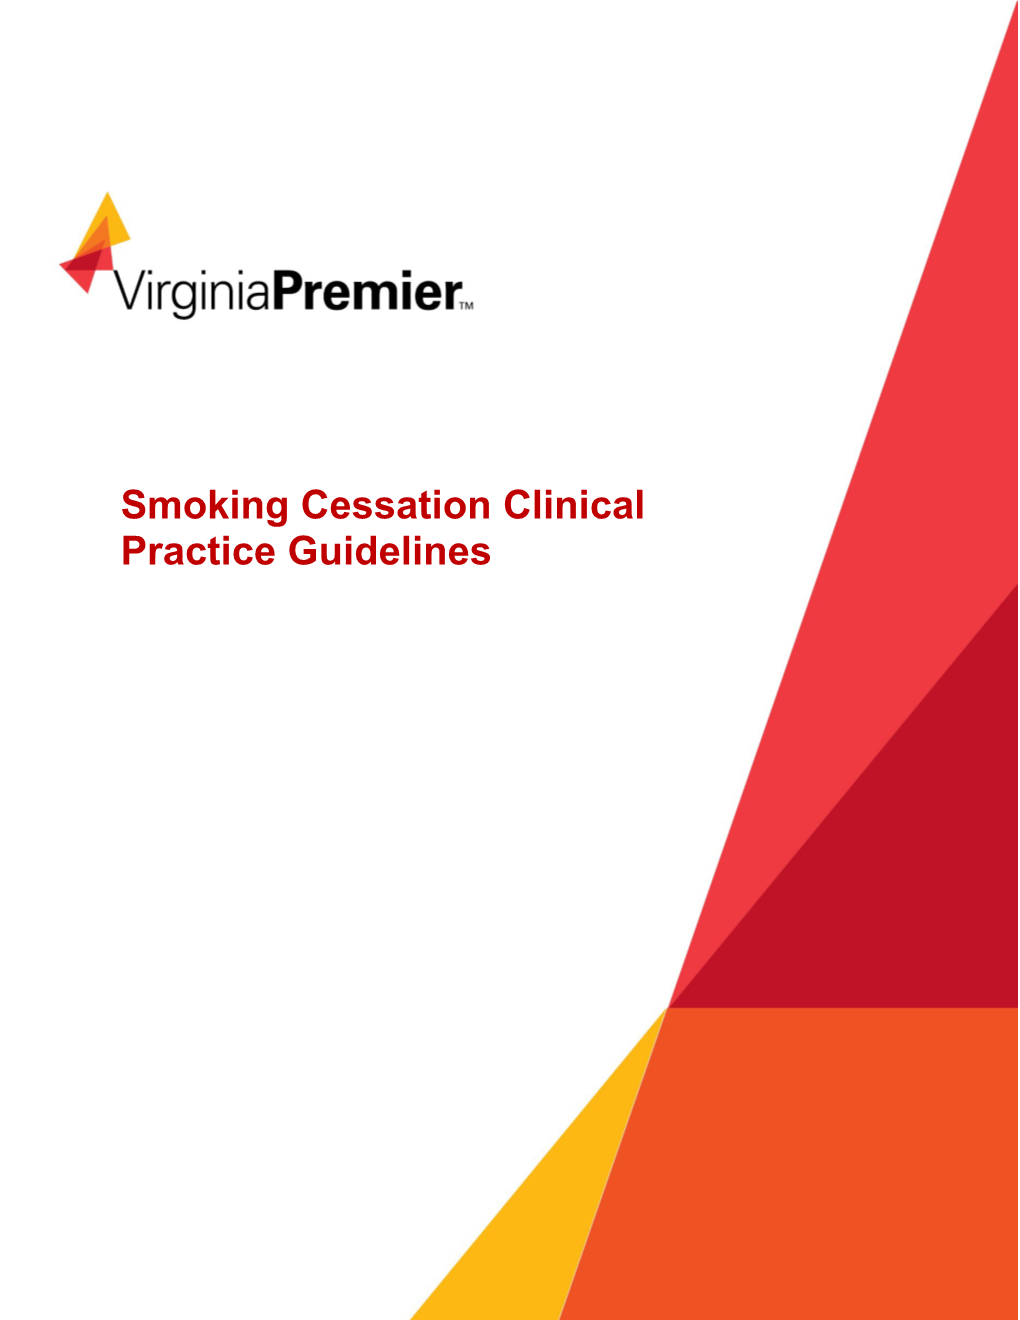 Smoking Cessation Clinical Practice Guidelines